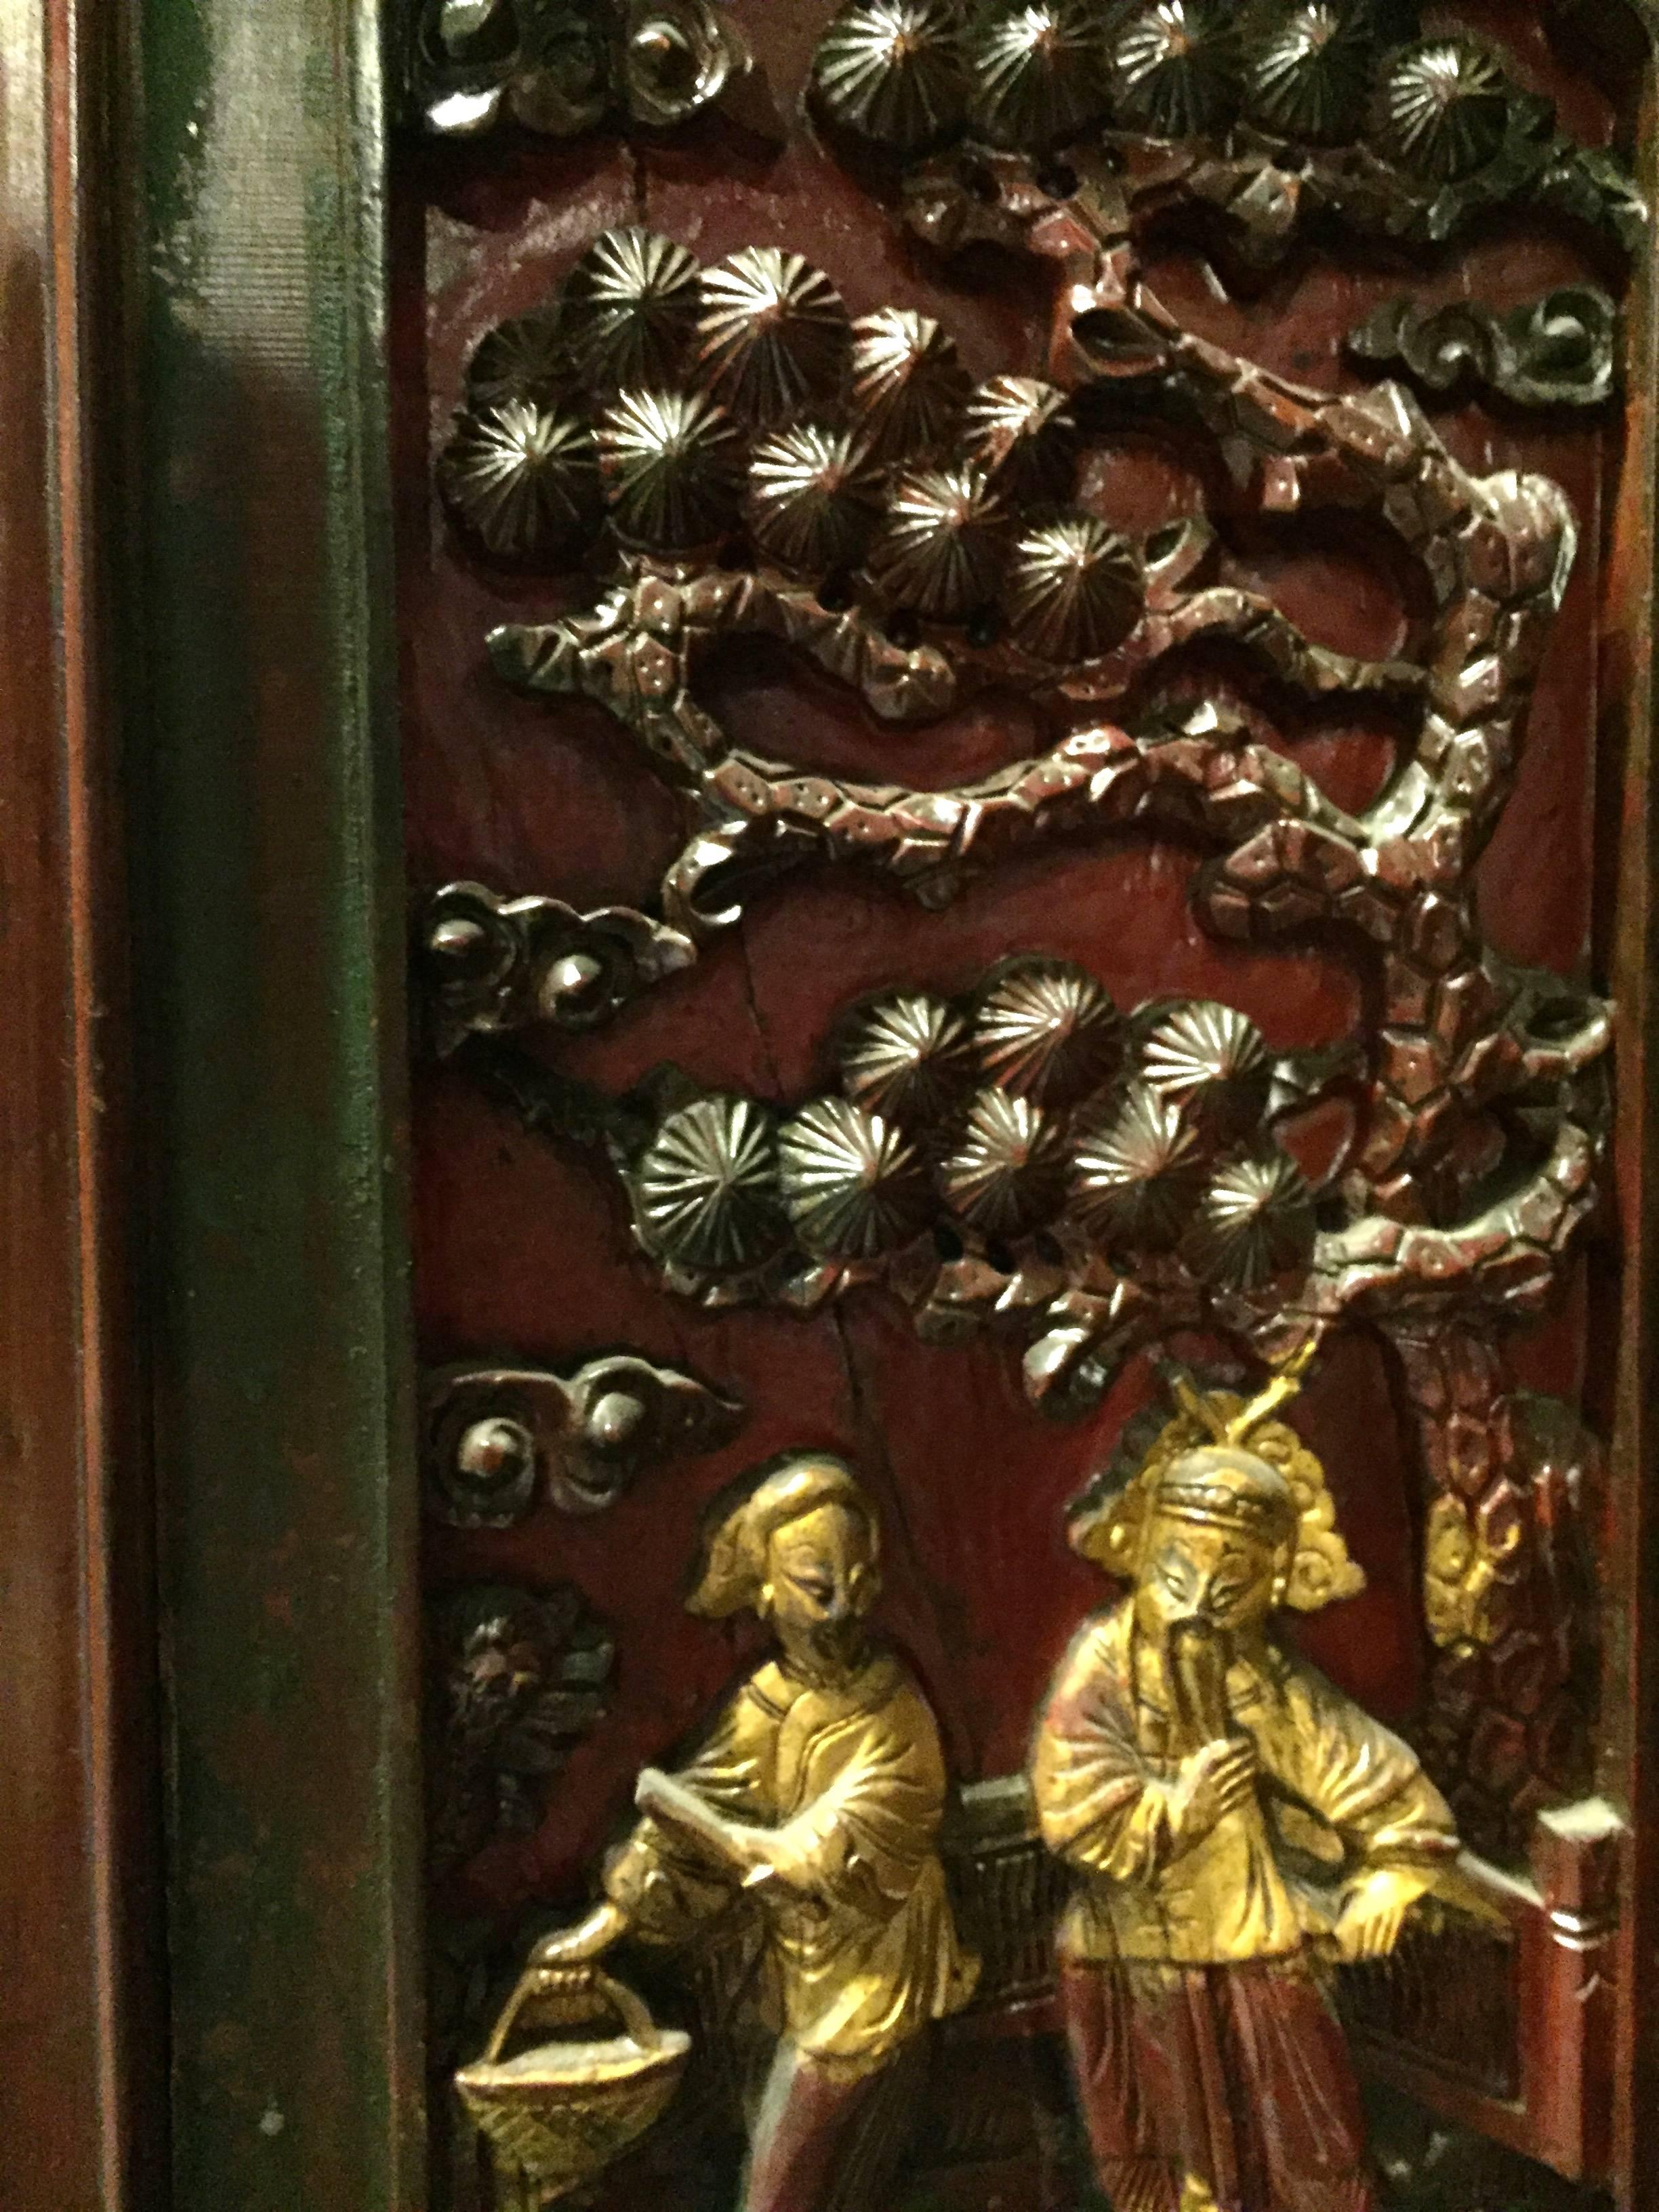 Beautiful cabinet features four finely carved panels depicting a courting couple. Mother-of-pearl encrusted frameworks and gilded figures highlight the theme. Carved butterflies decorate the corners of the cabinet with more butterflies repeated on